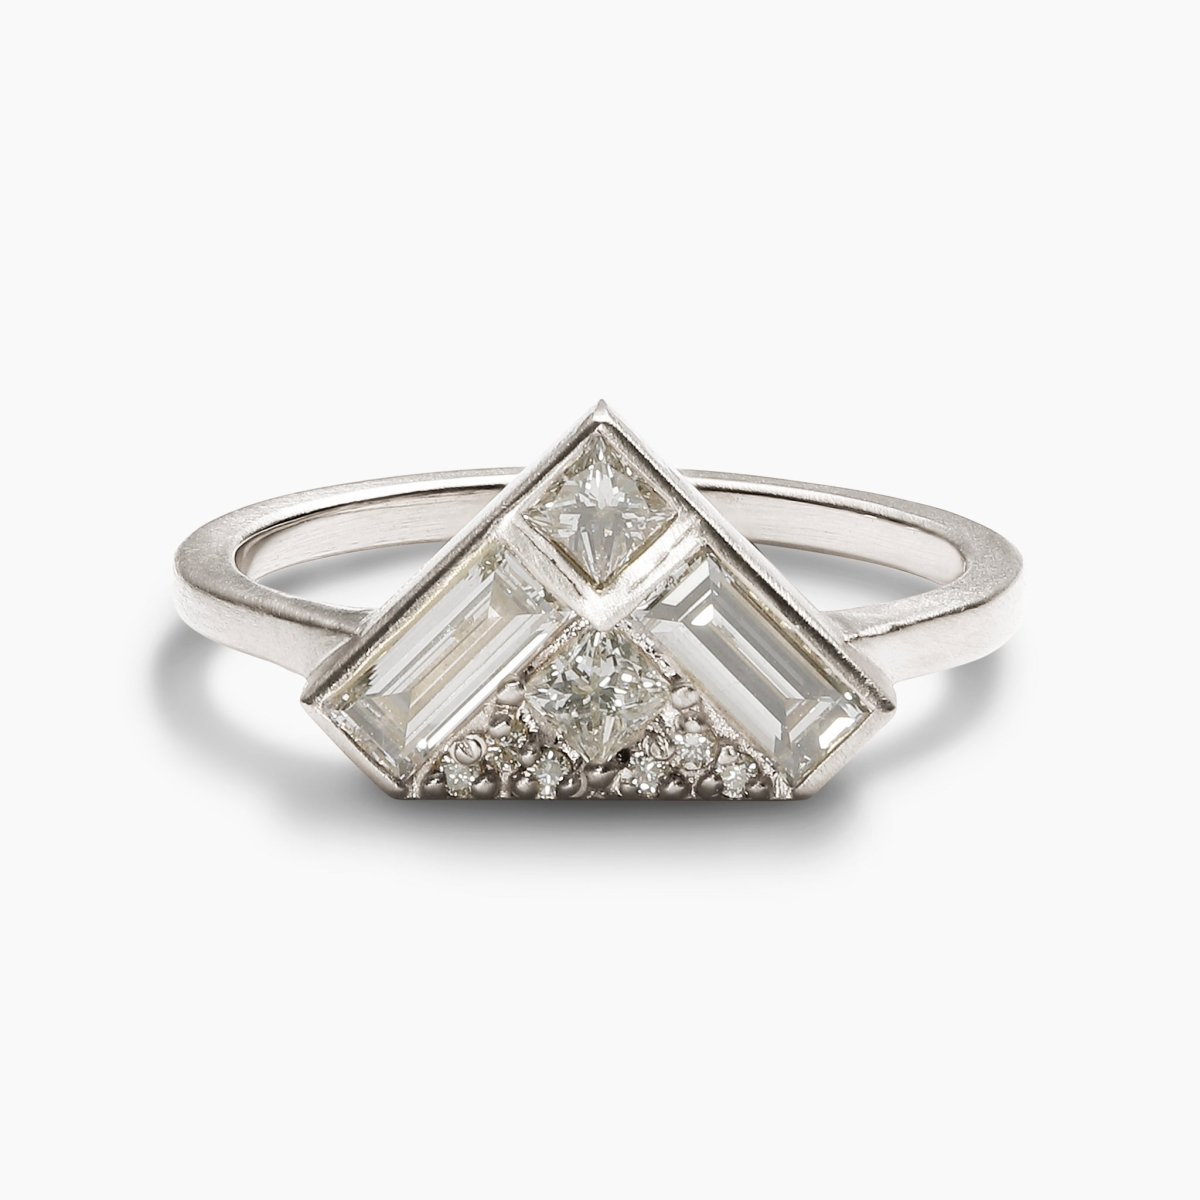 Triangular Aurore ring, set in 14K white gold with lab-grown diamonds. Designed and handcrafted in Portland, Oregon.